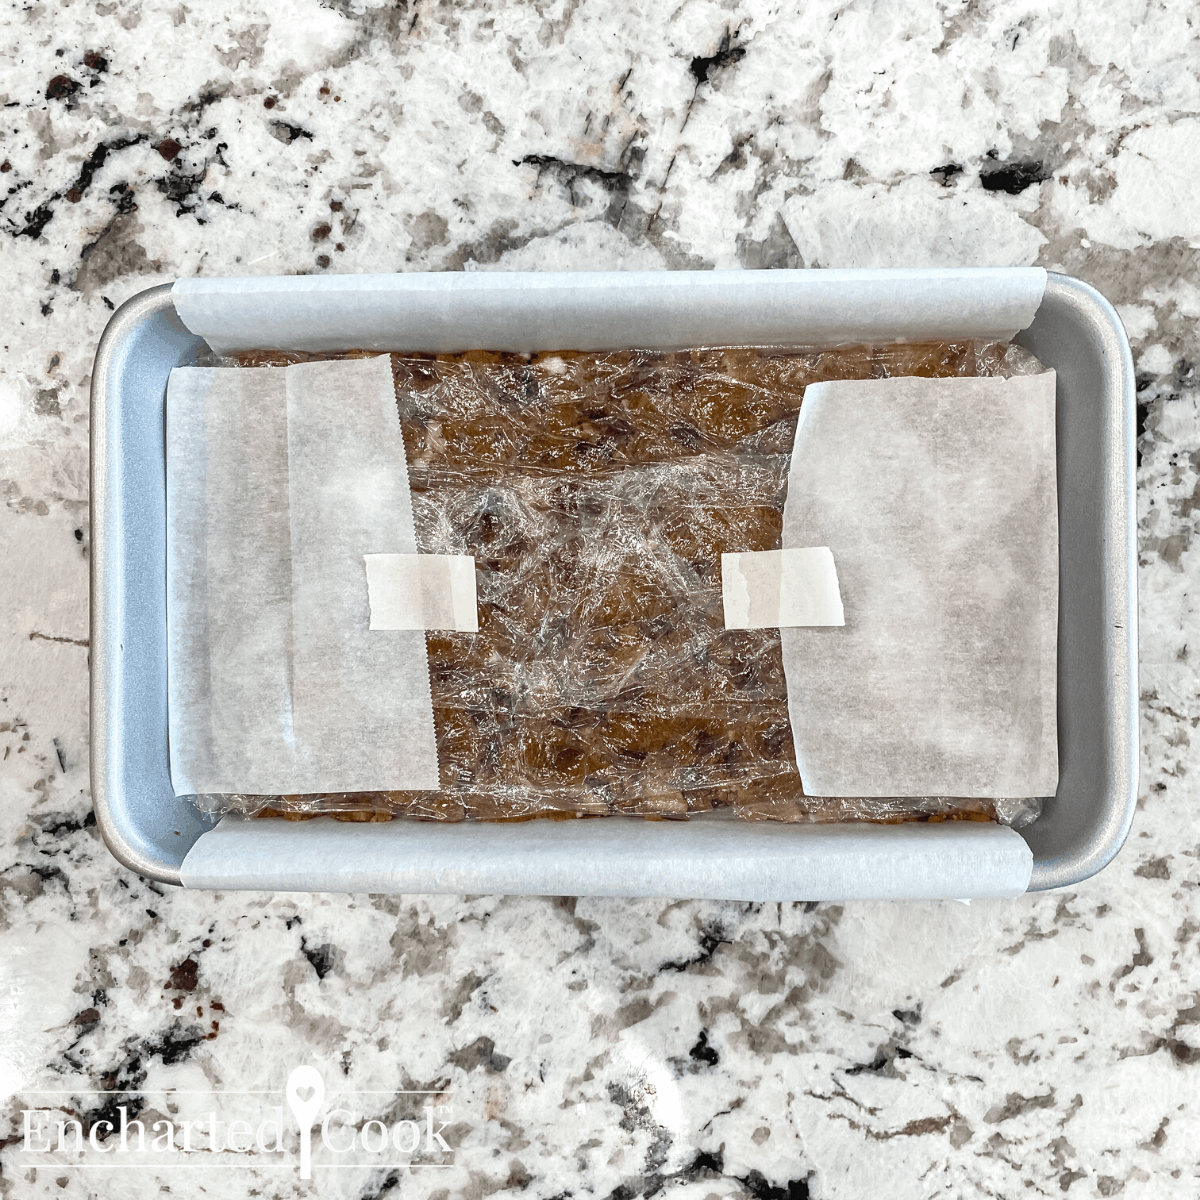 The cake is packed into the parchment paper loaf pan. The top of the fruitcake is covered with plastic wrap.